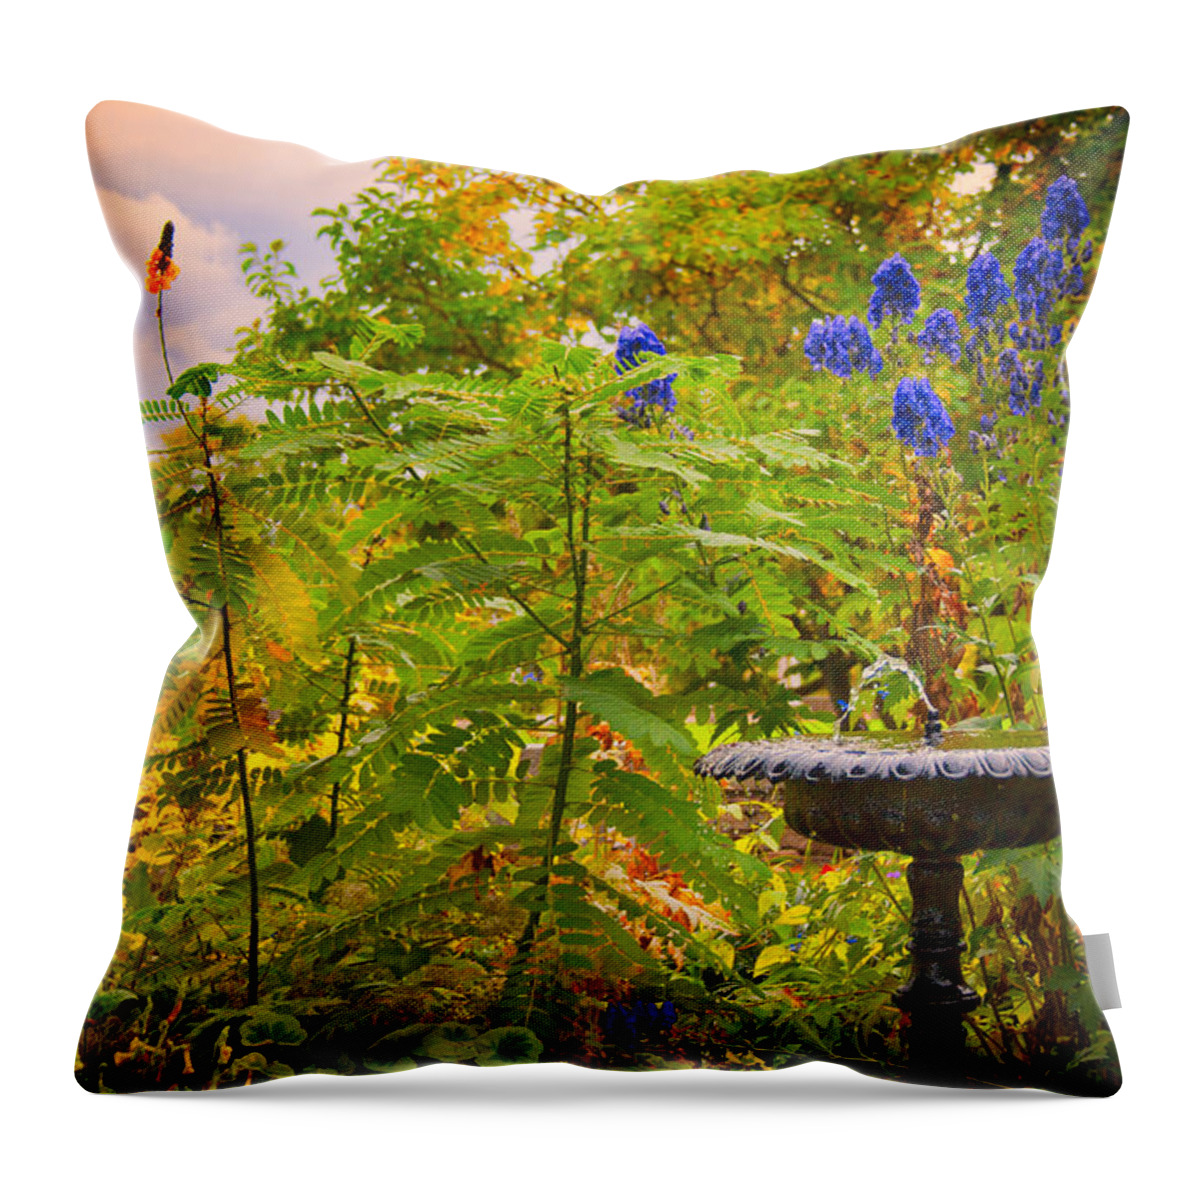 Fountain Throw Pillow featuring the photograph The Gods Look On by Mike Smale